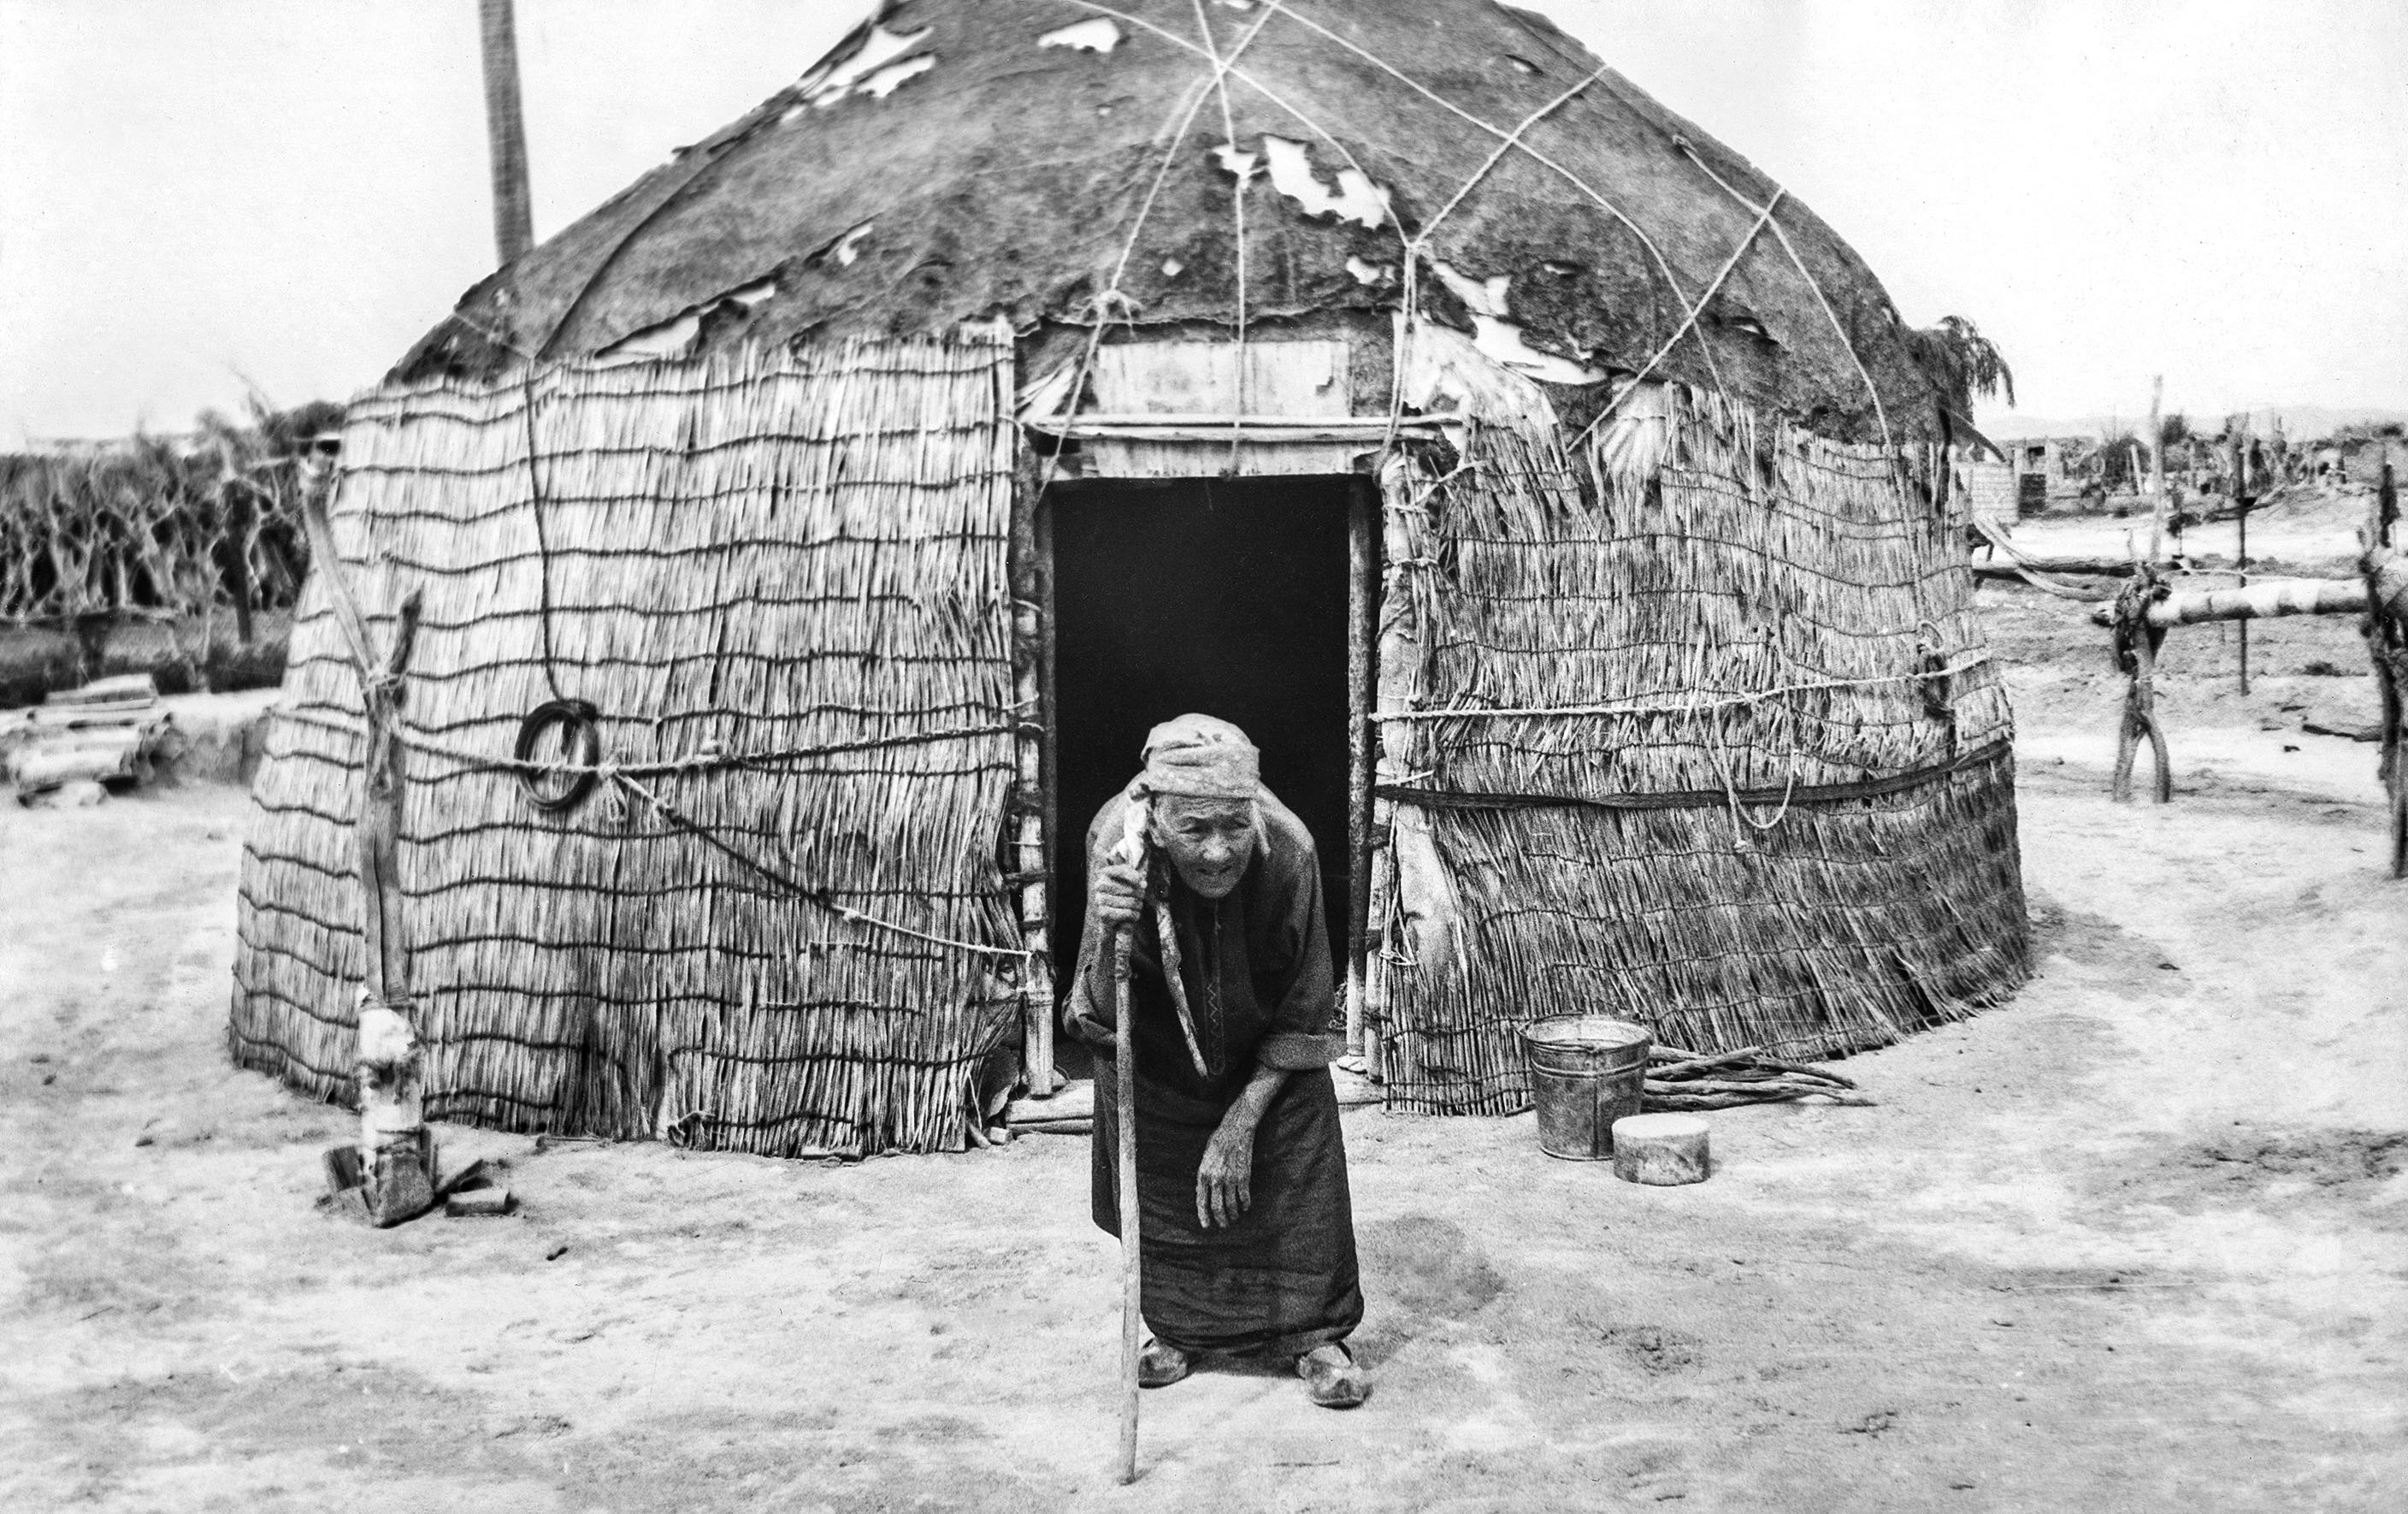 Elderly woman with walking stick seen in front of yurt (<span style="font-style: italic;">gara öy</span>).&nbsp;<p class="MsoNormal"><o:p></o:p></p>&nbsp;<br>